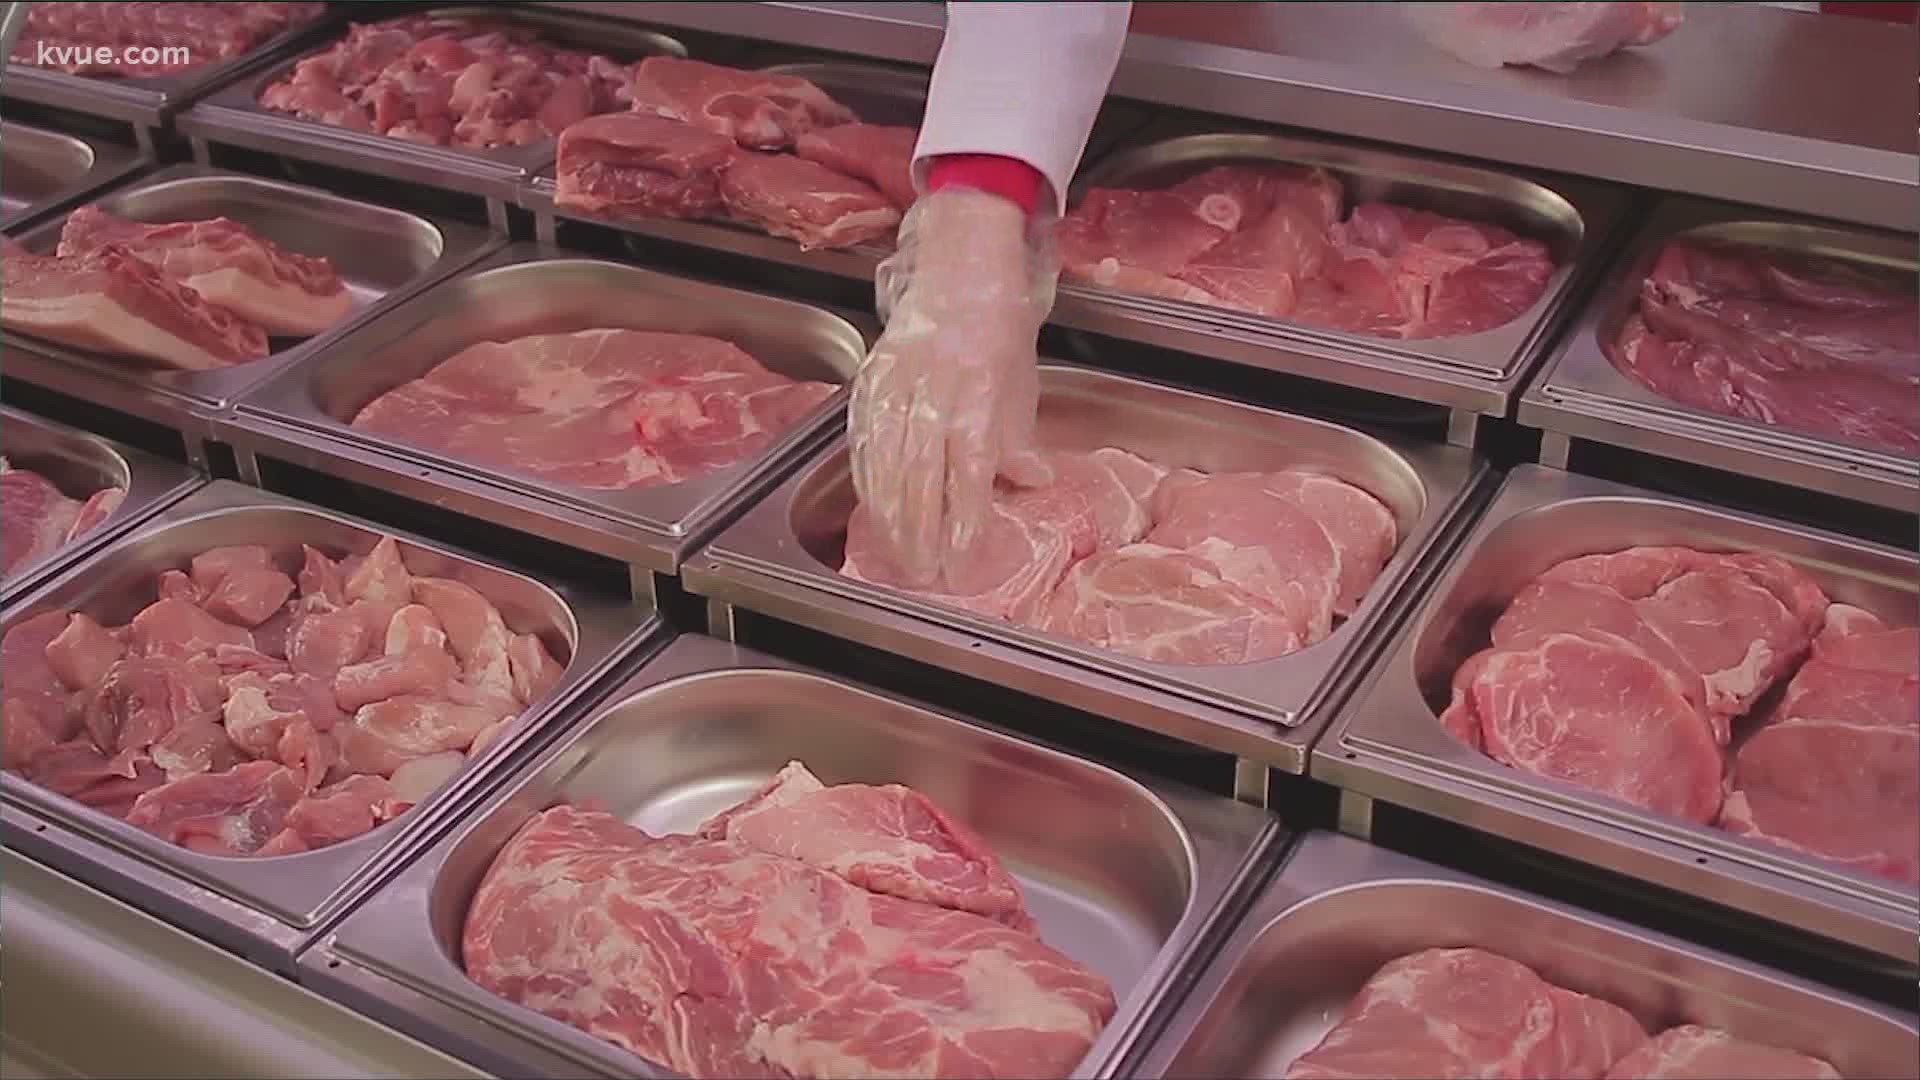 H-E-B is scaling back some limits on how much meat you can buy at the grocery store.